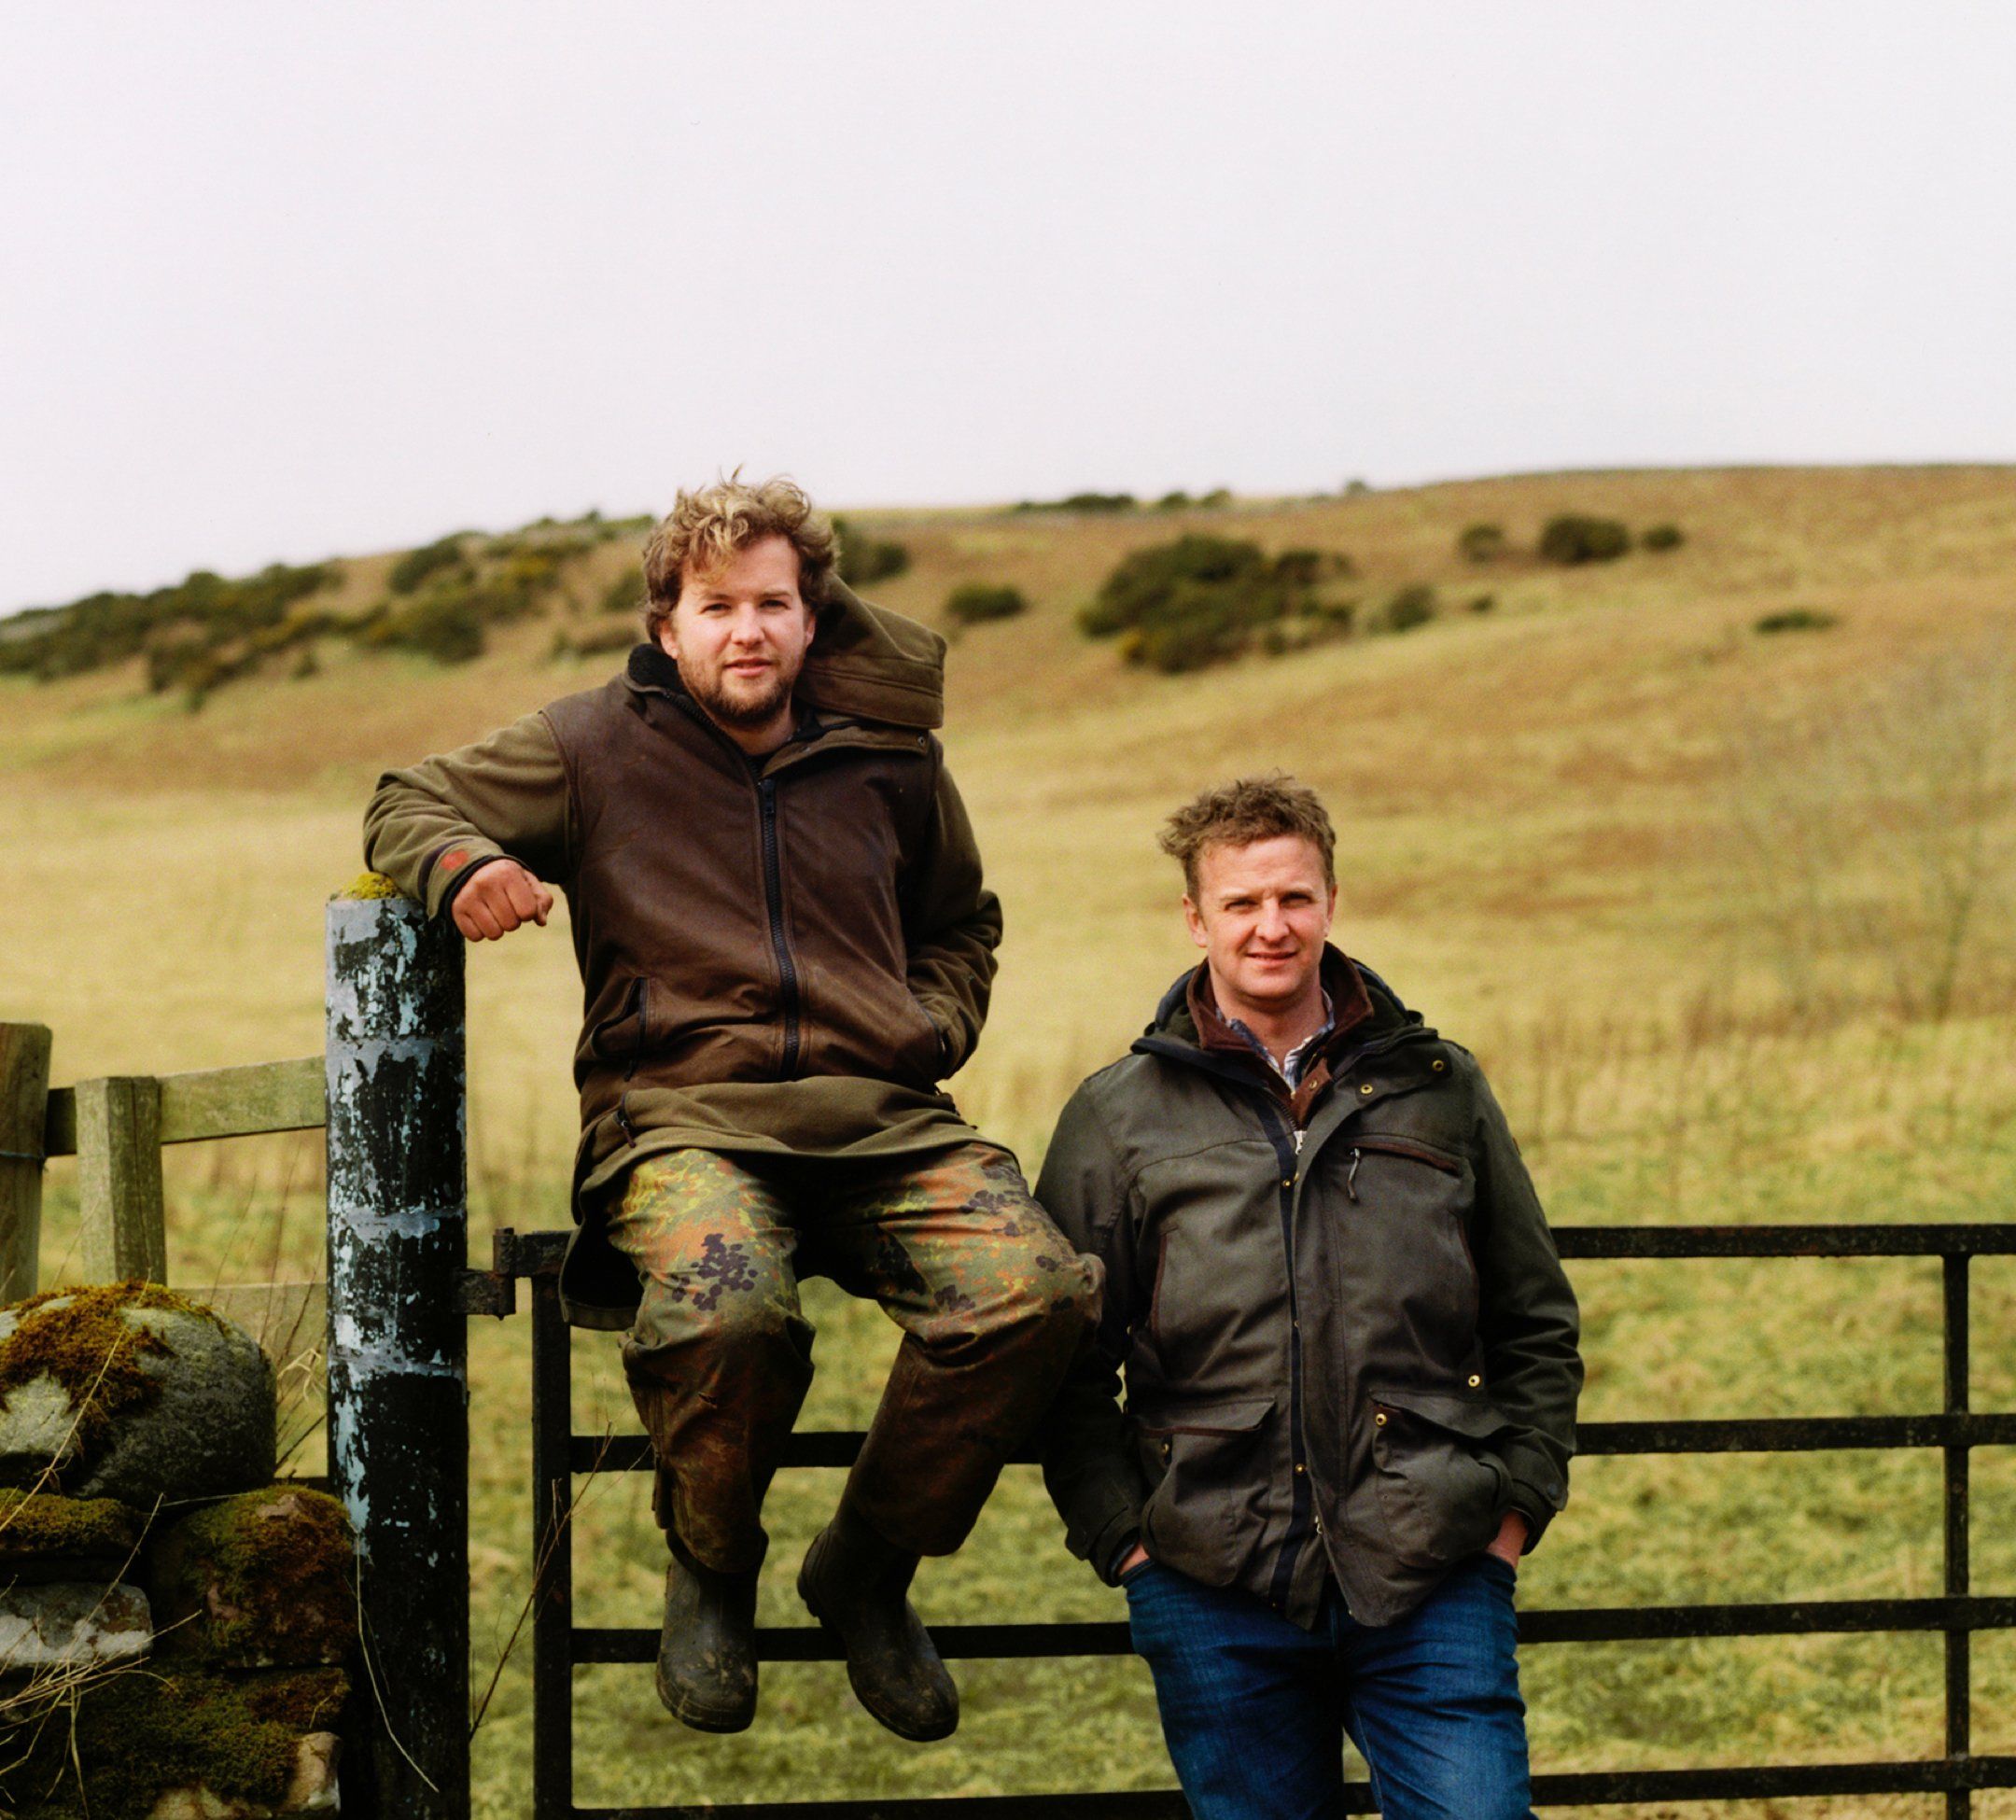 two farmers Andrew and Robert Brewster in work clothes sitting on a farm fence